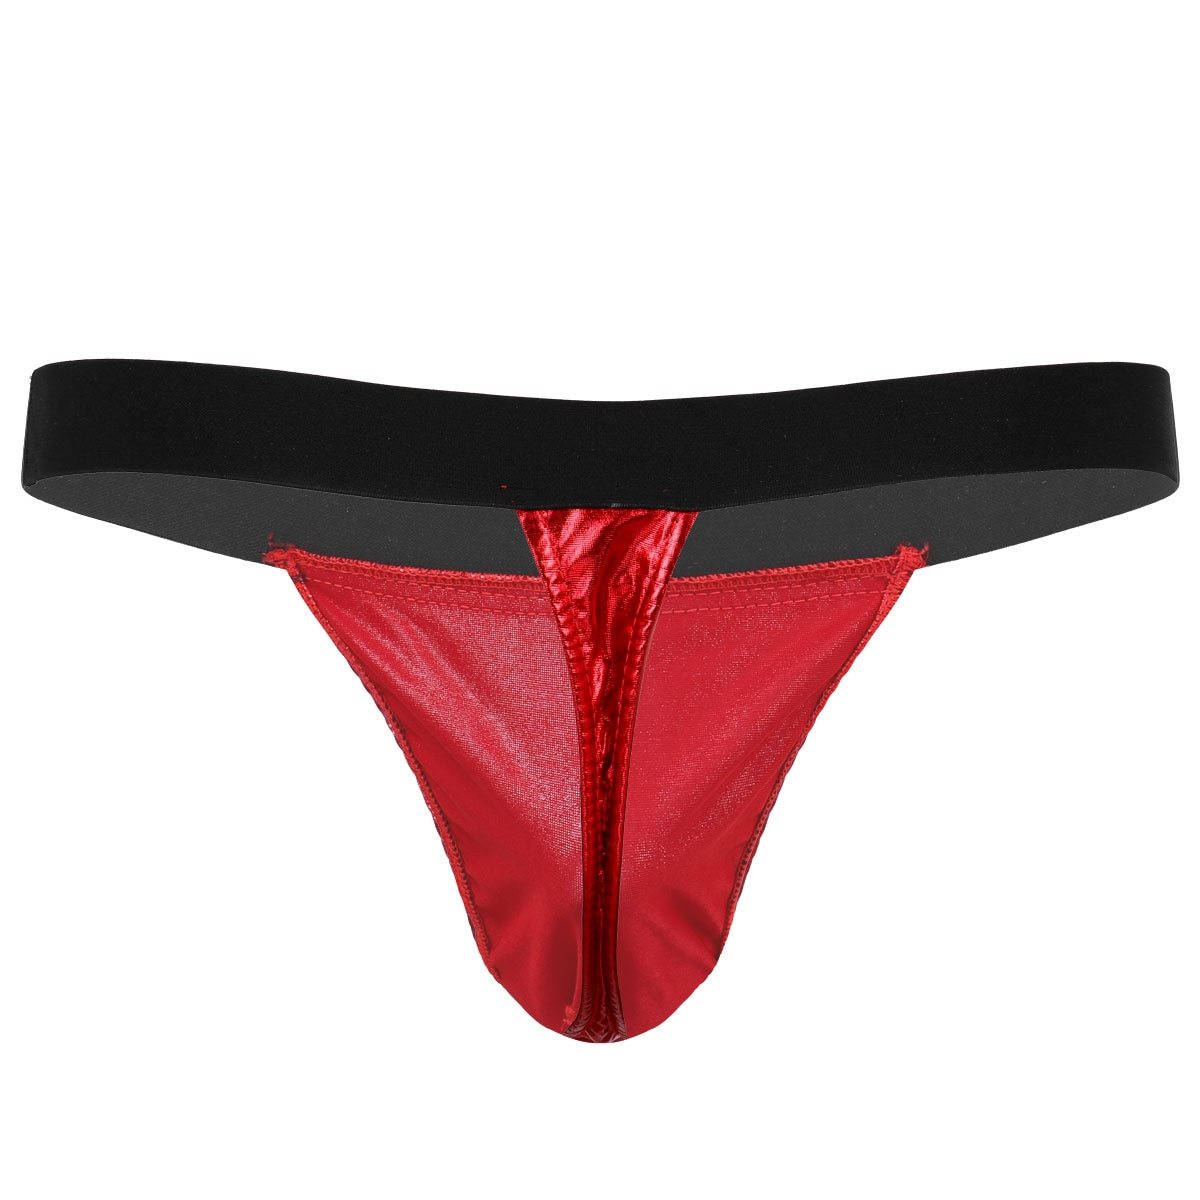 XMAS GIFT - Mens Christmas Santa Pouch Thong with Decoration Ball Red